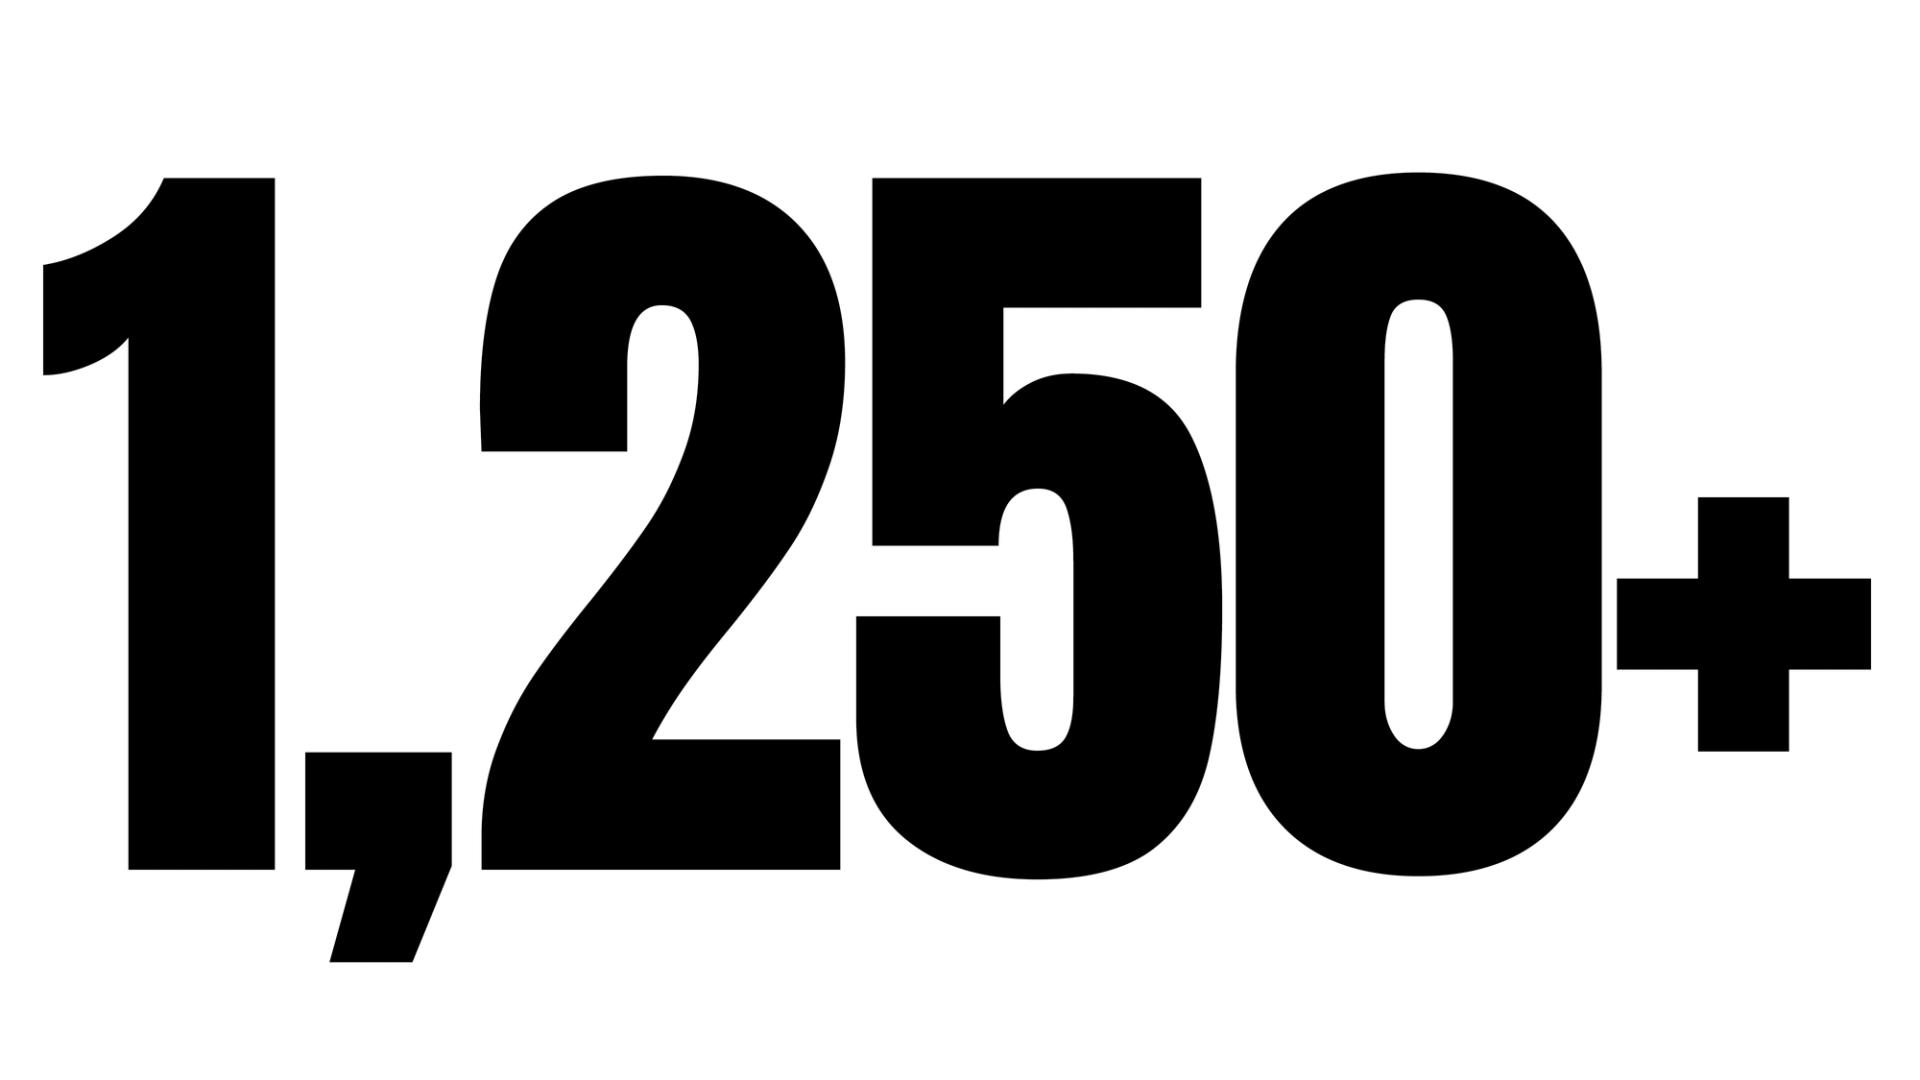 A graphic with text which says 1,250+